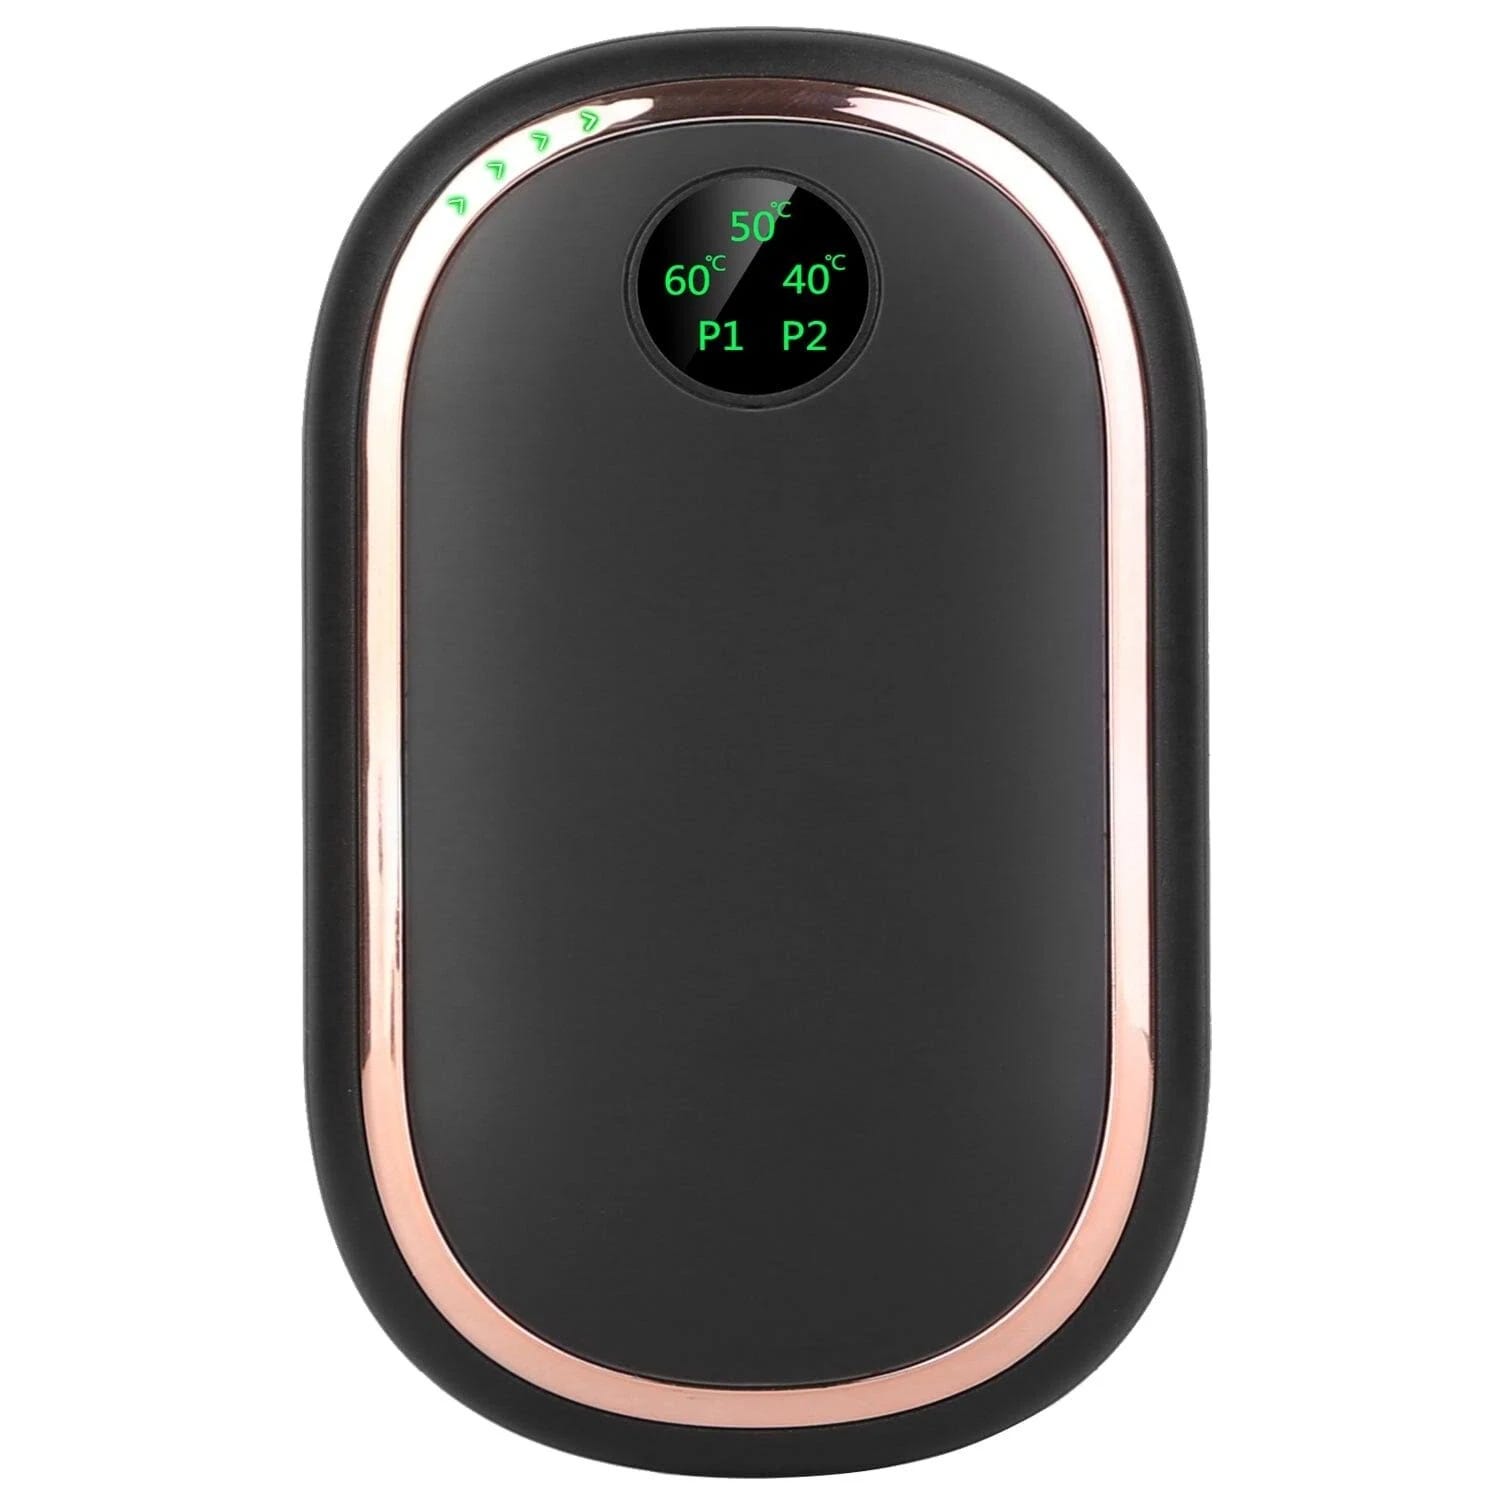 Rechargeable Hand Heater Pocket Warmer for Cold Hands and Electronic Devices | Image